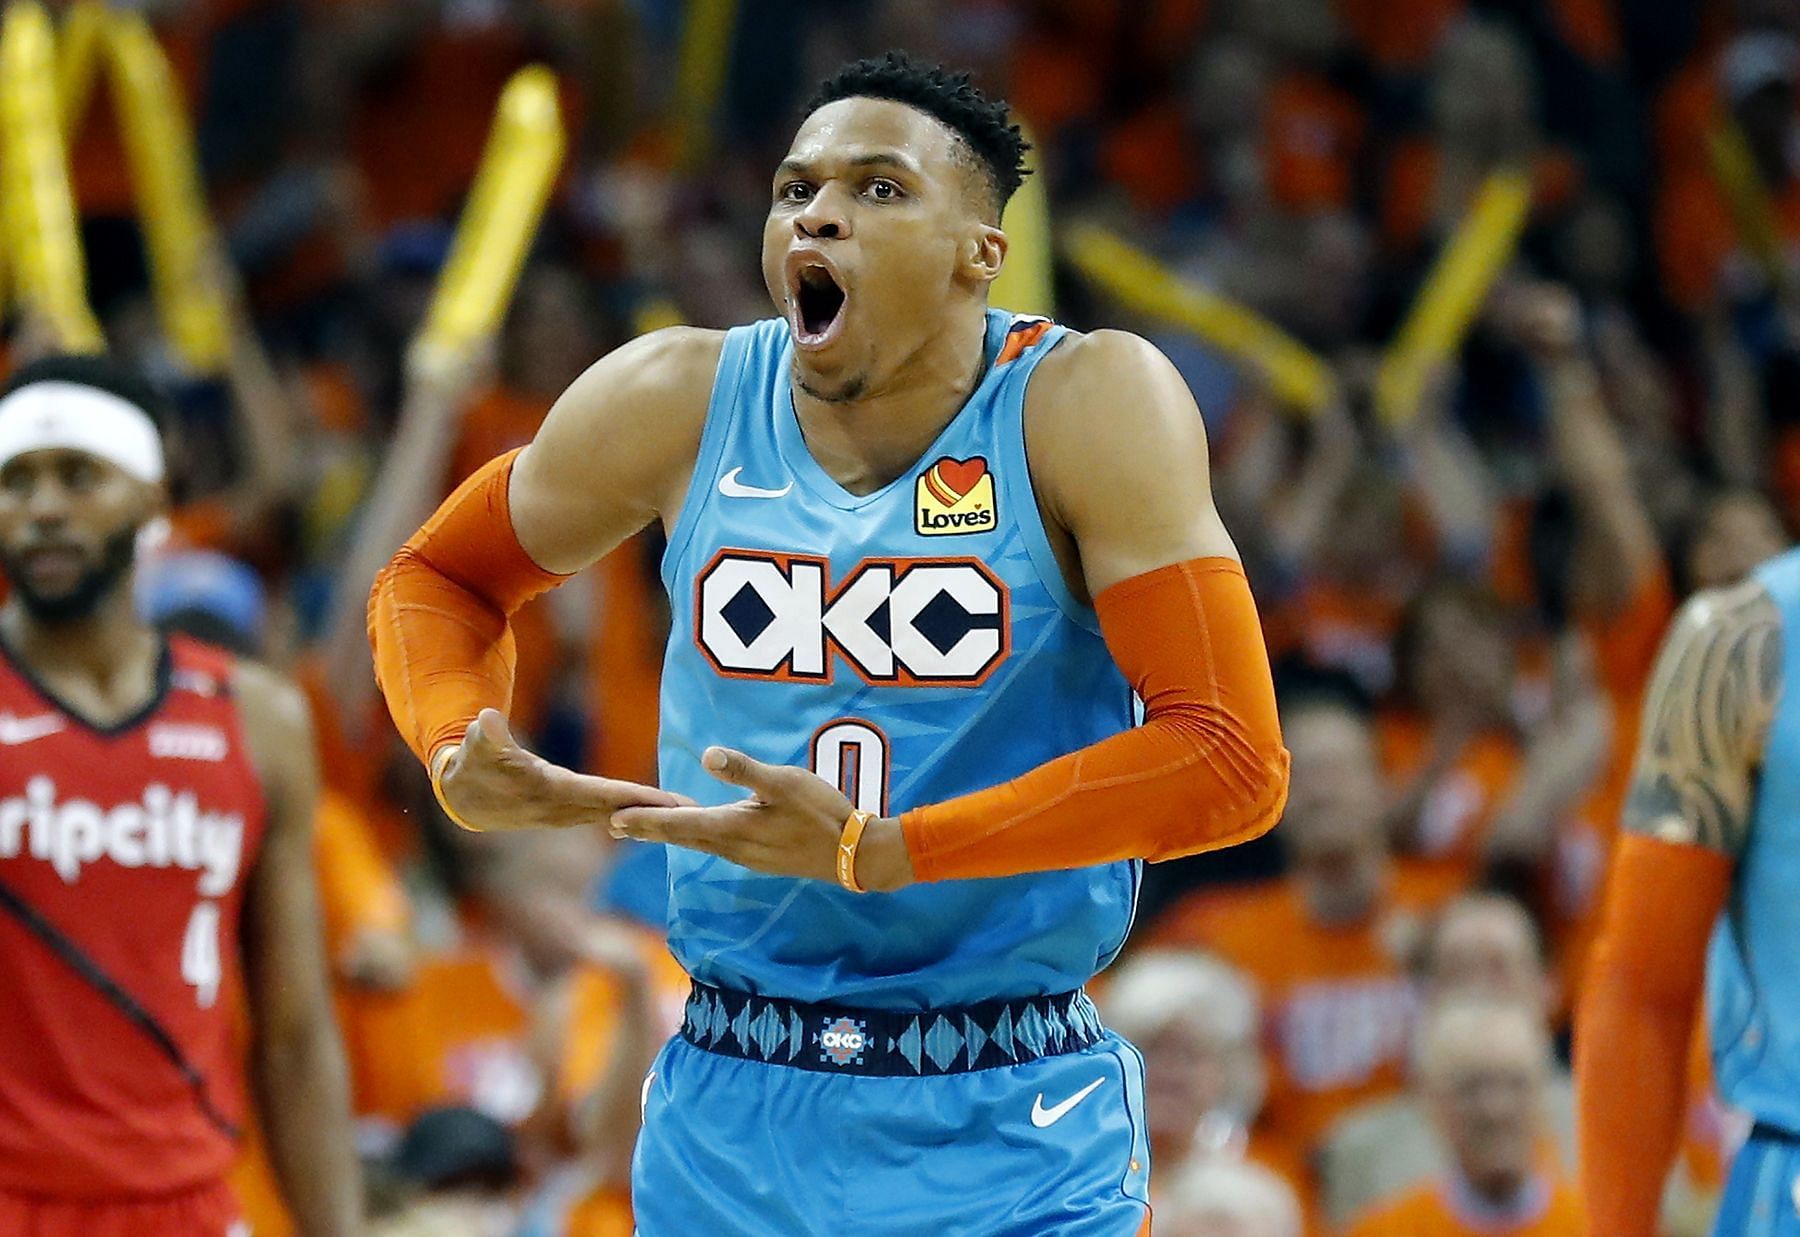 Russell Westbrook &ldquo;rocked the baby&rdquo; against Mikal Bridges in the first quarter of the game between the Phoenix Suns and the LA Lakers [Photo: quotes about life]